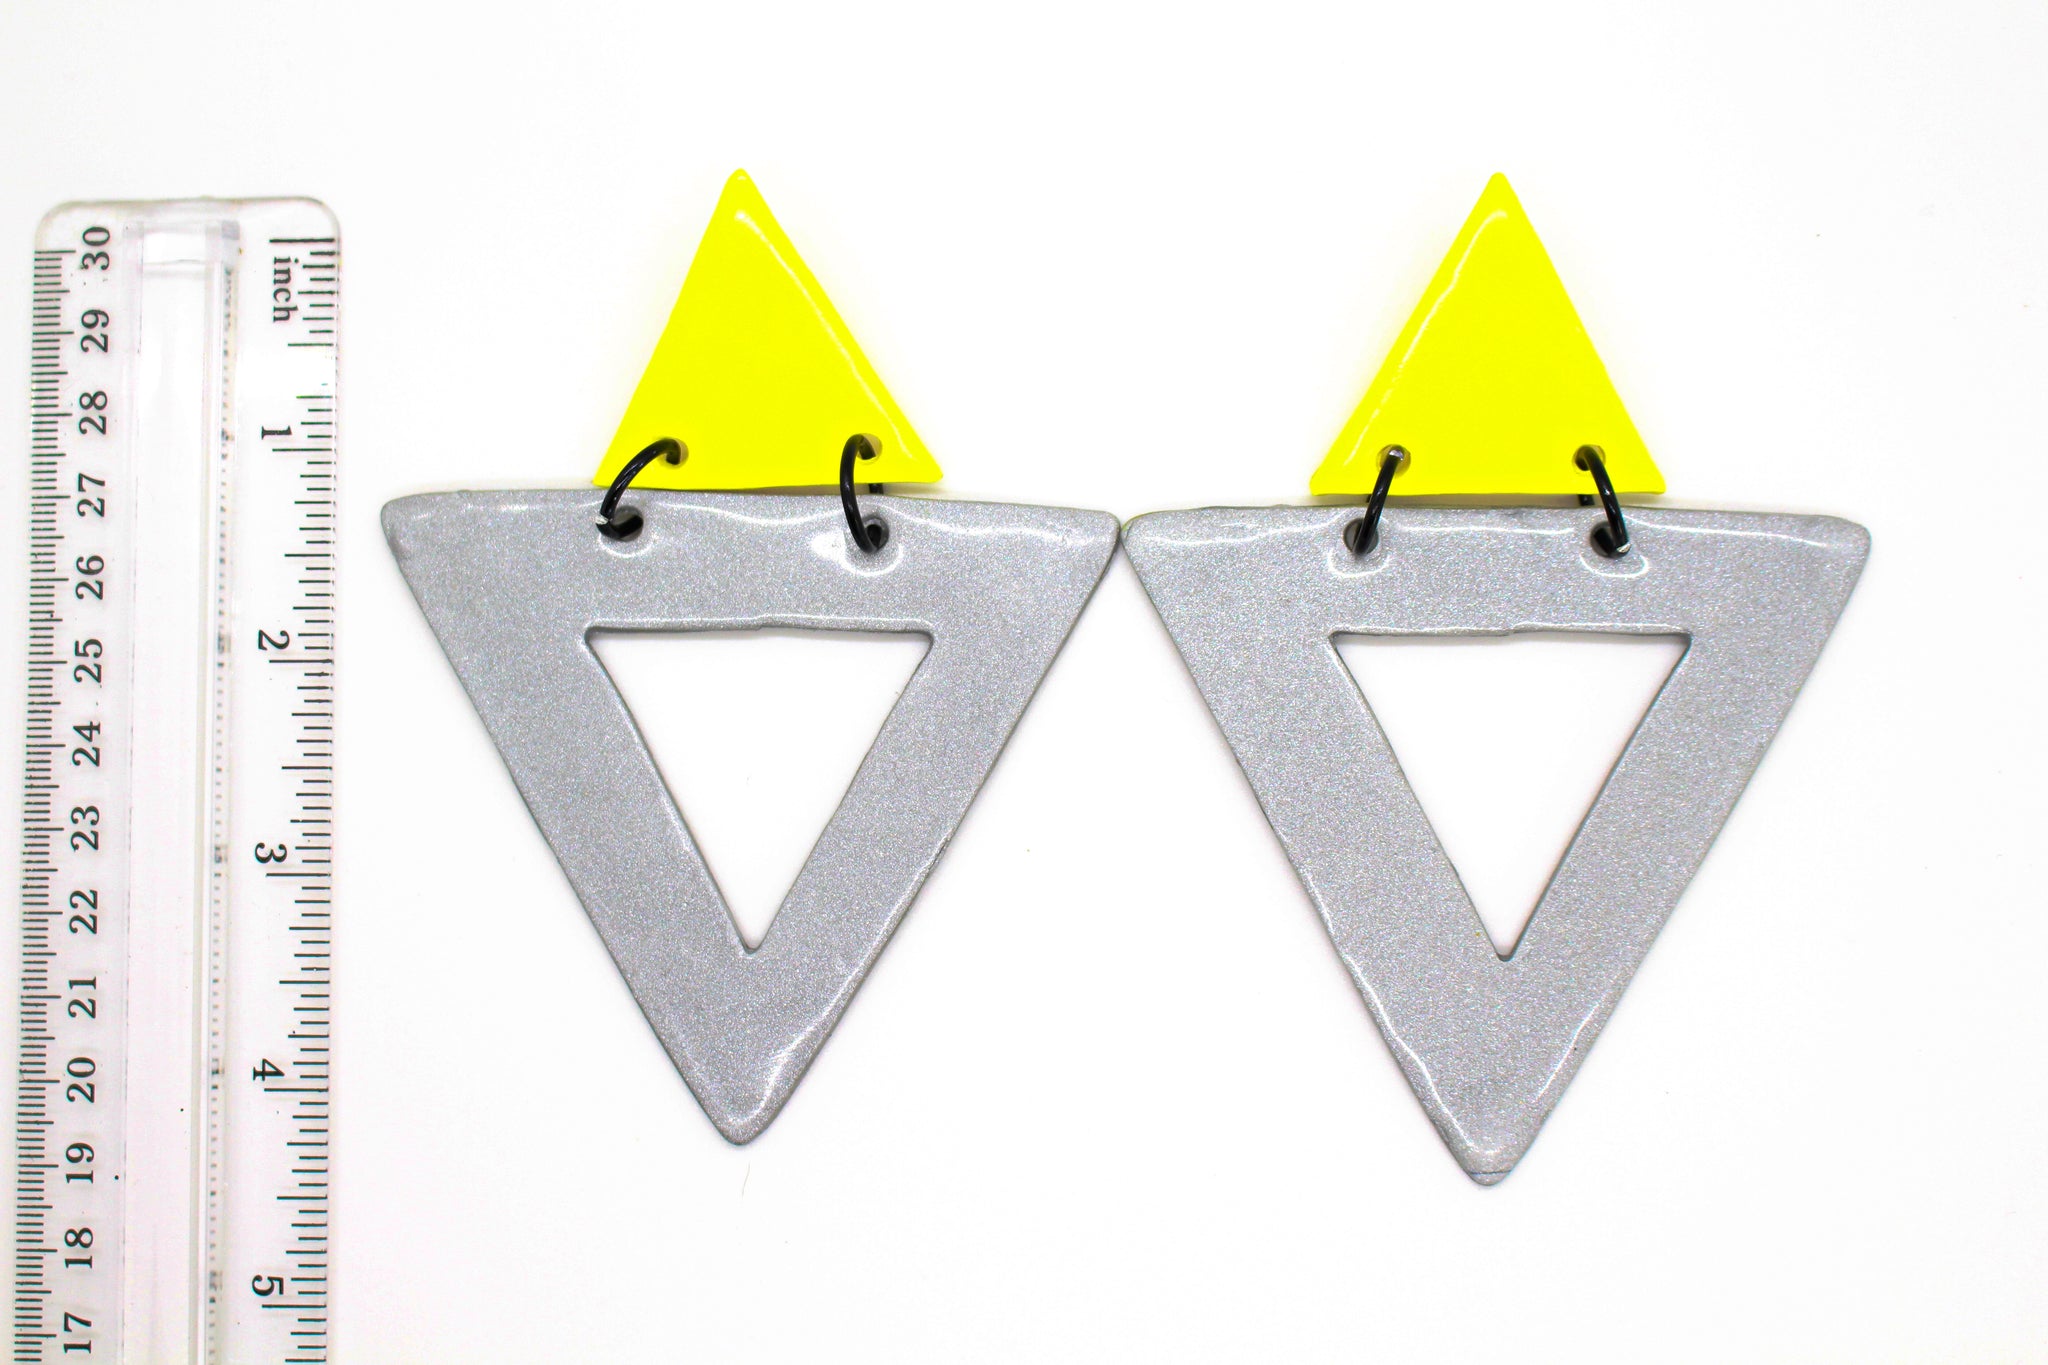 KD-1112a "Halle" Angular Drop Posts in Yellow/Gray